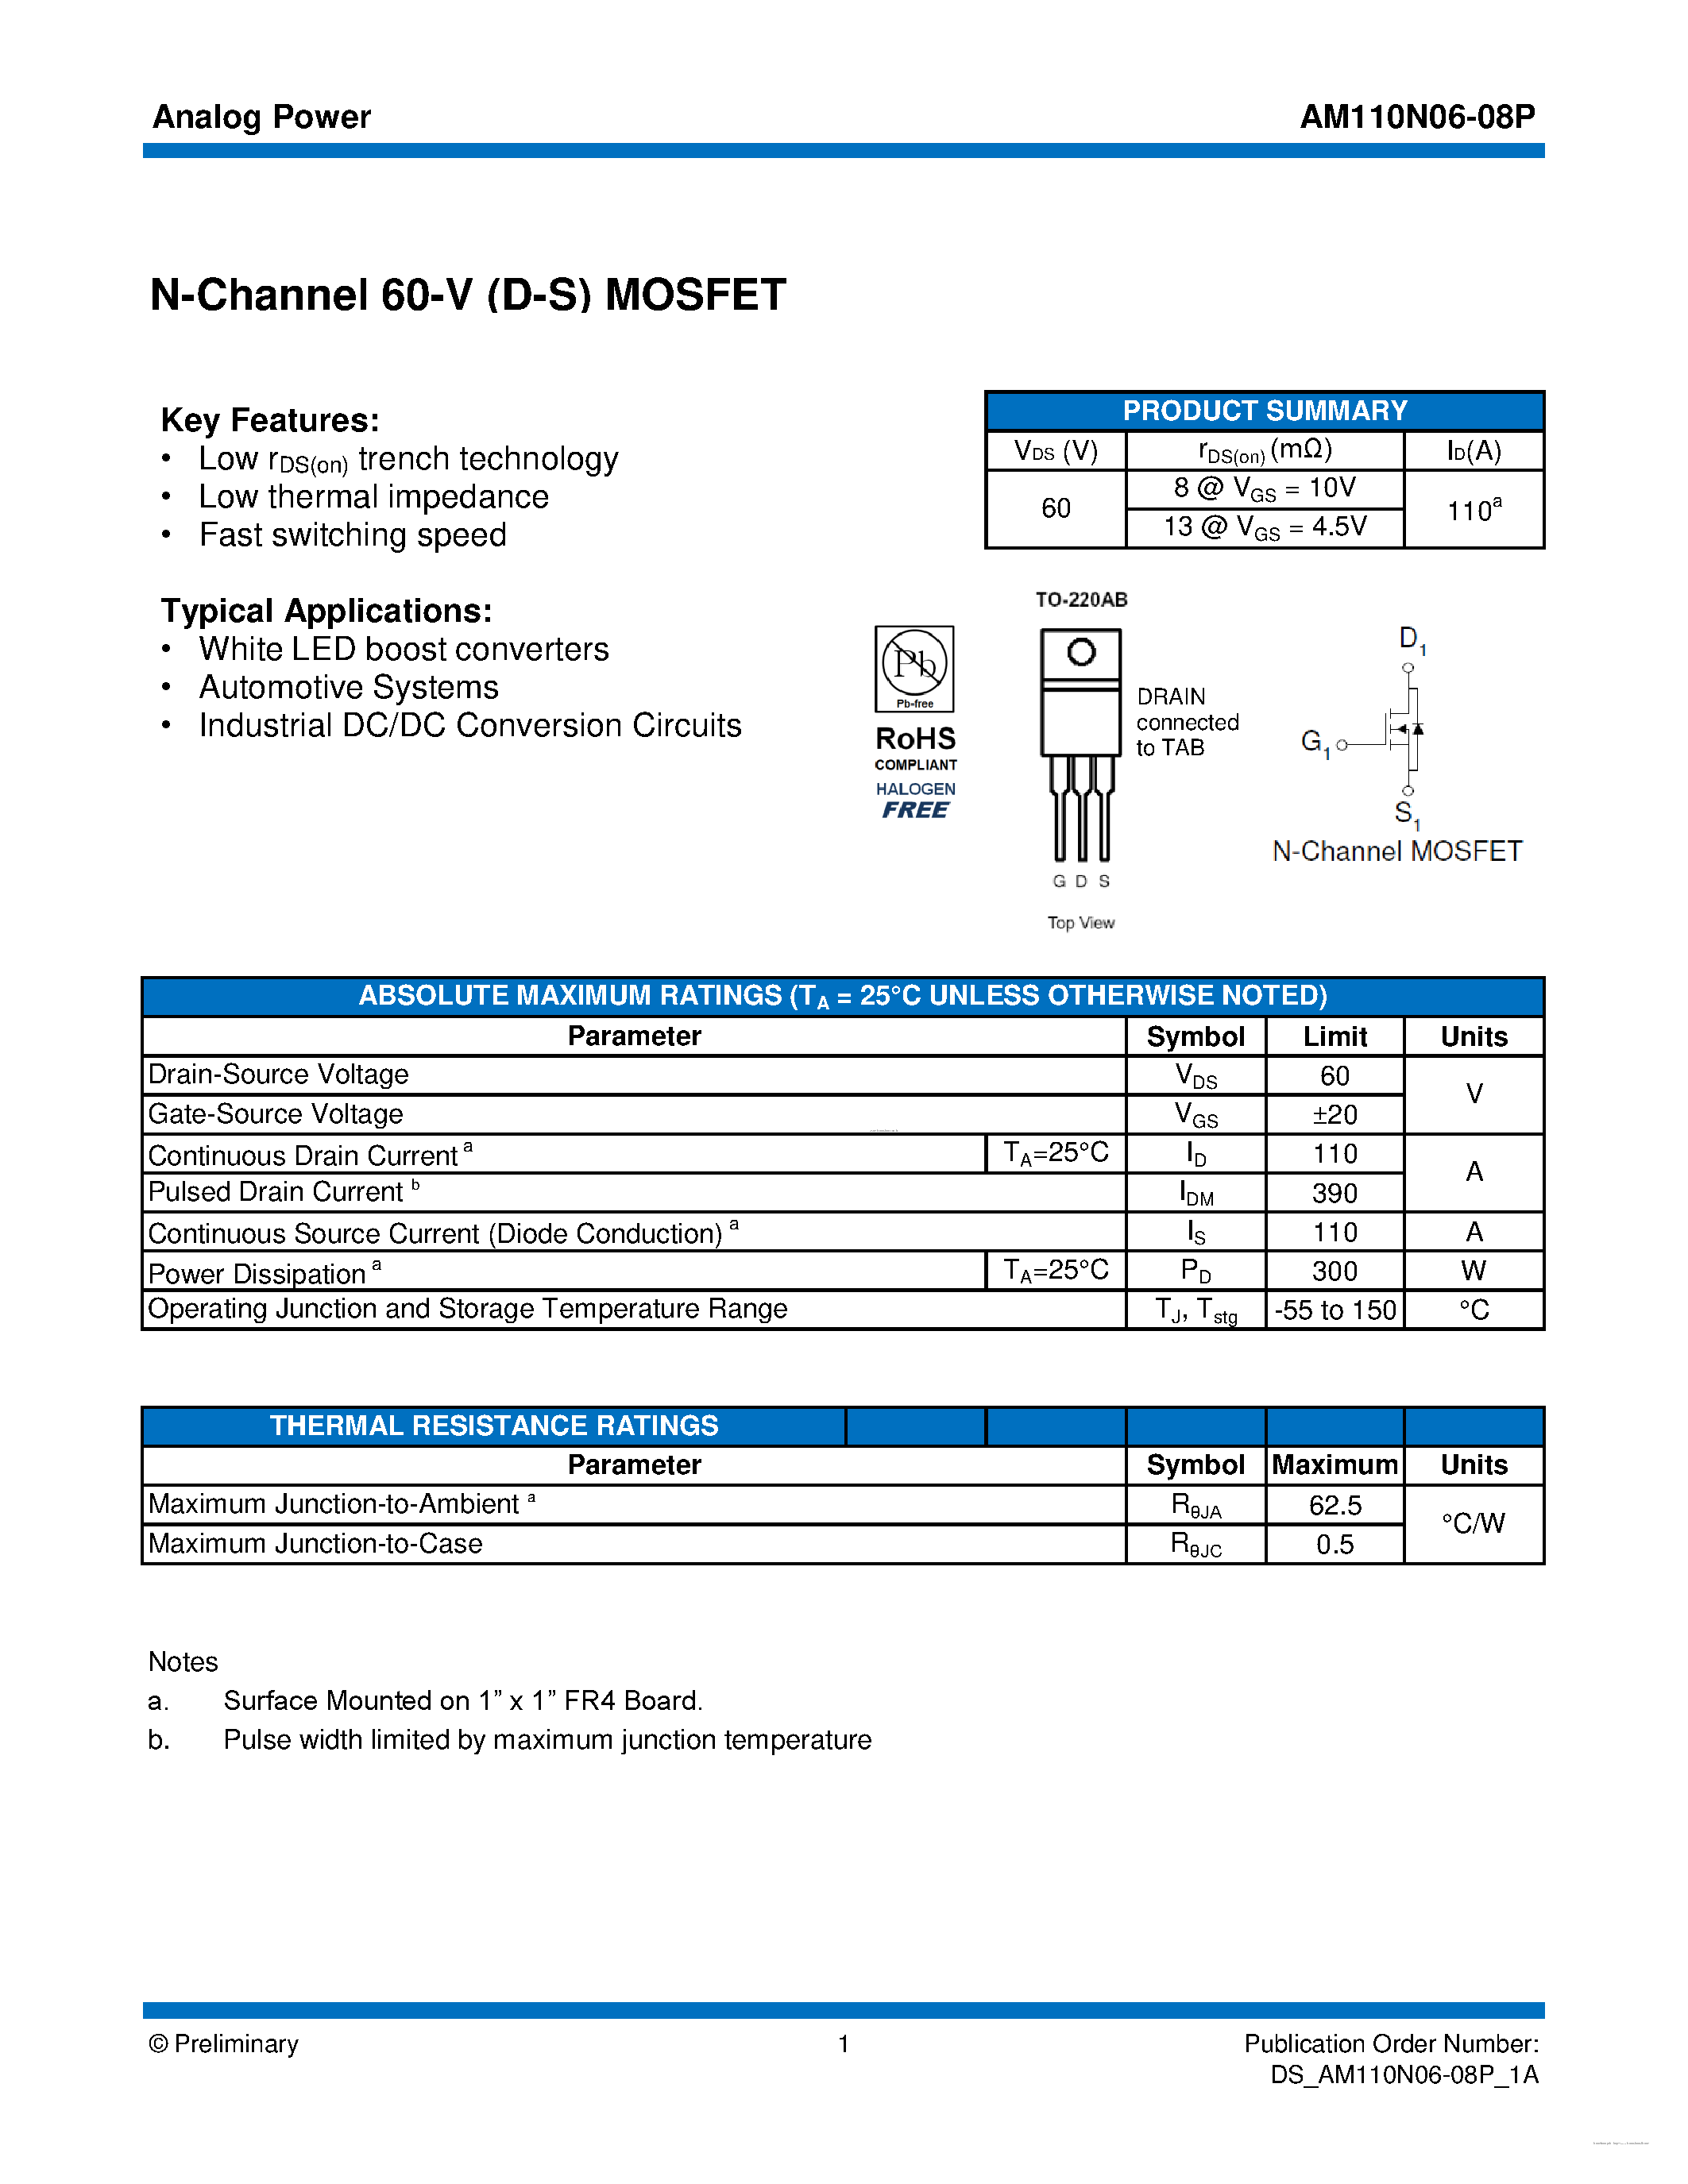 Datasheet AM110N06-08P - N-Channel 60-V (D-S) MOSFET page 1